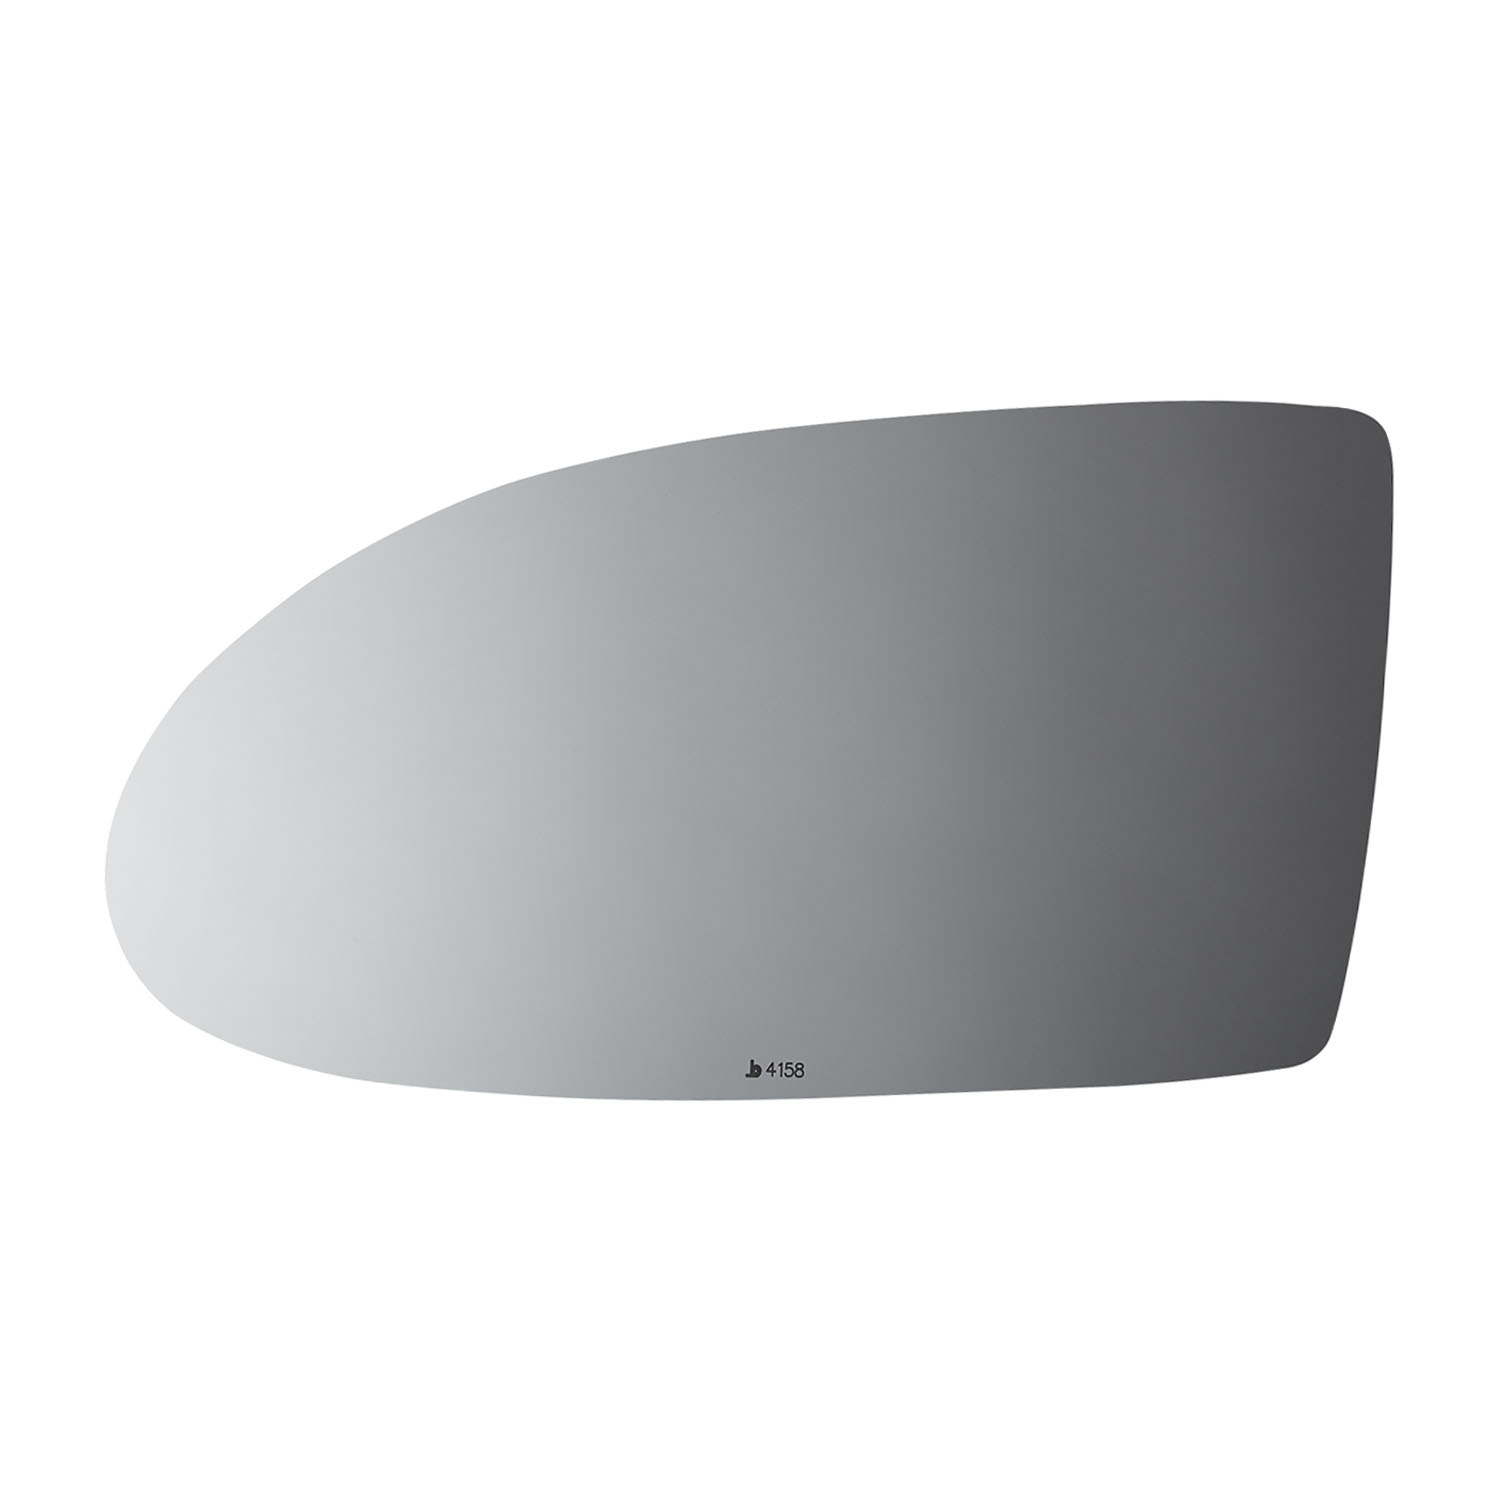 4158 SIDE VIEW MIRROR